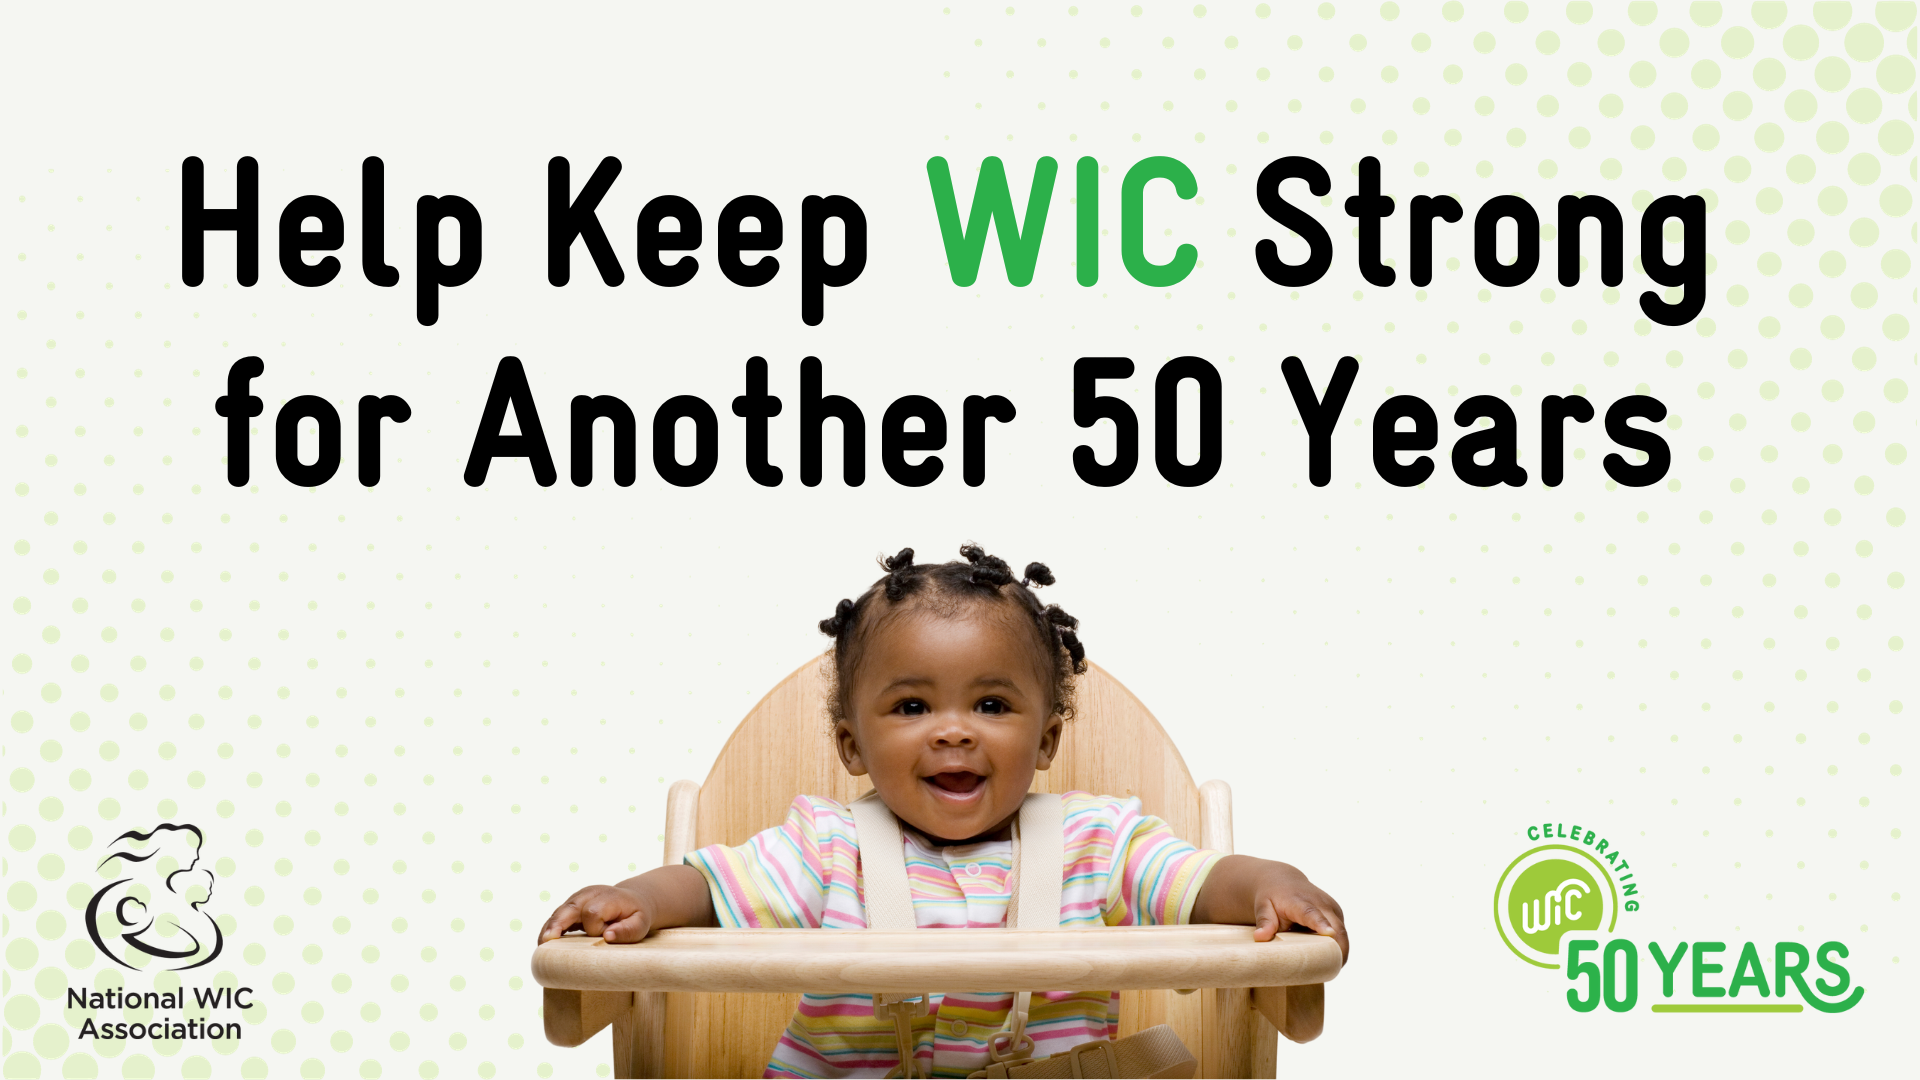 WIC 50th Anniversary Campaign National WIC Association (Powered by